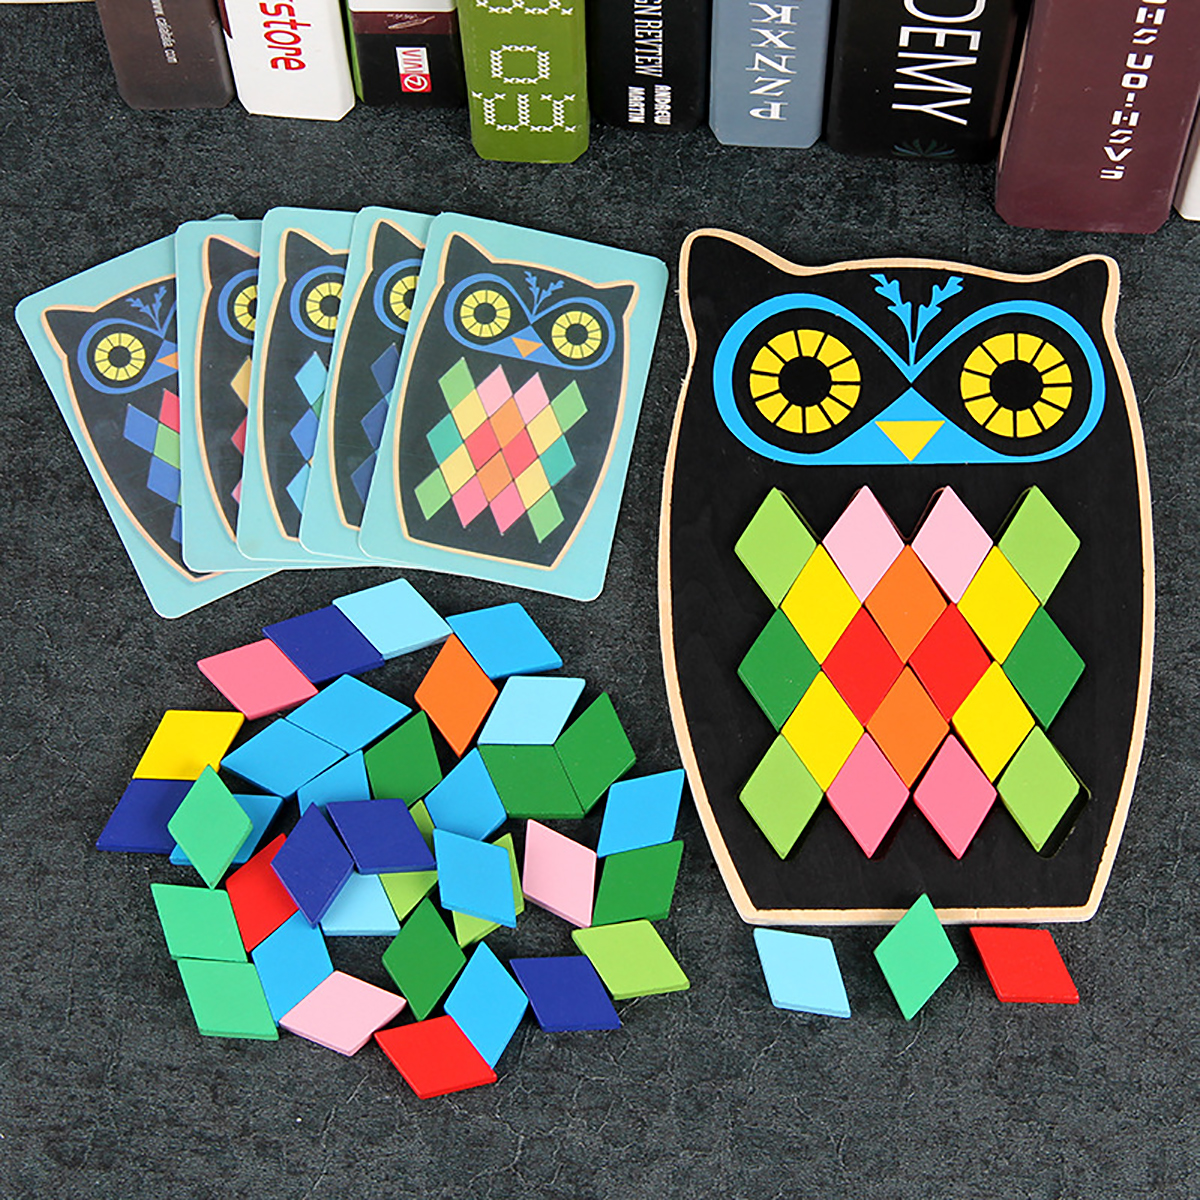 Wood DIY Assembly Jigsaw Puzzle Toy Colors Shapes Cartoon Fish Owl Matching Cards Toy for Children Learning - Photo: 2